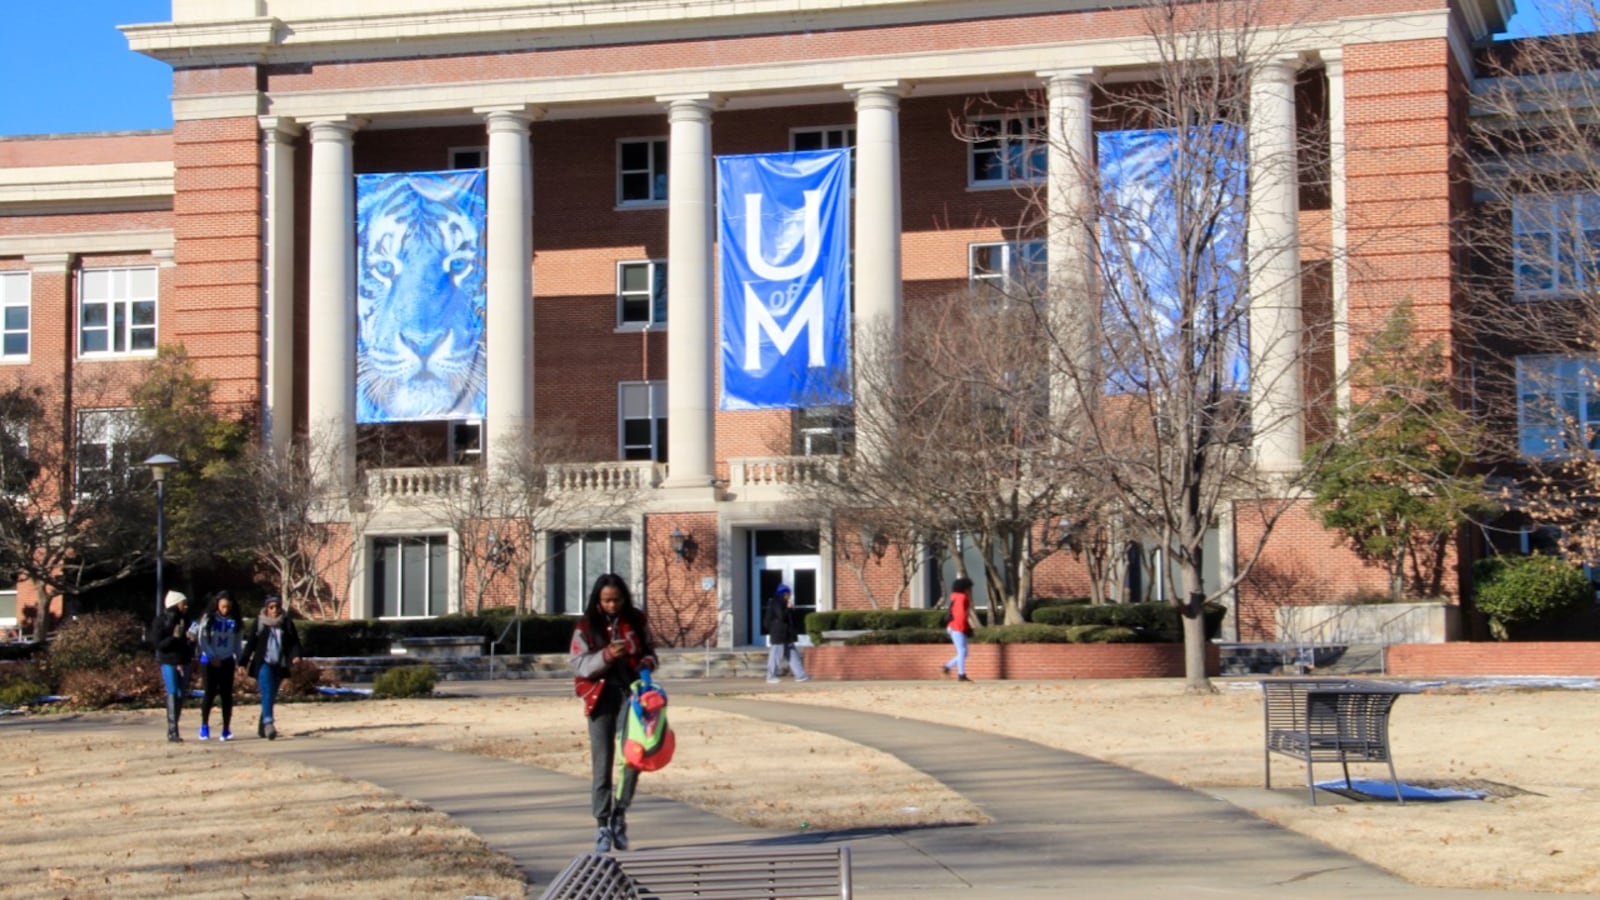 Shortly after creating its River City Partnership in 2017, The University of Memphis established is creating an urban teacher training track in its College of Education in partnership with Shelby County Schools.